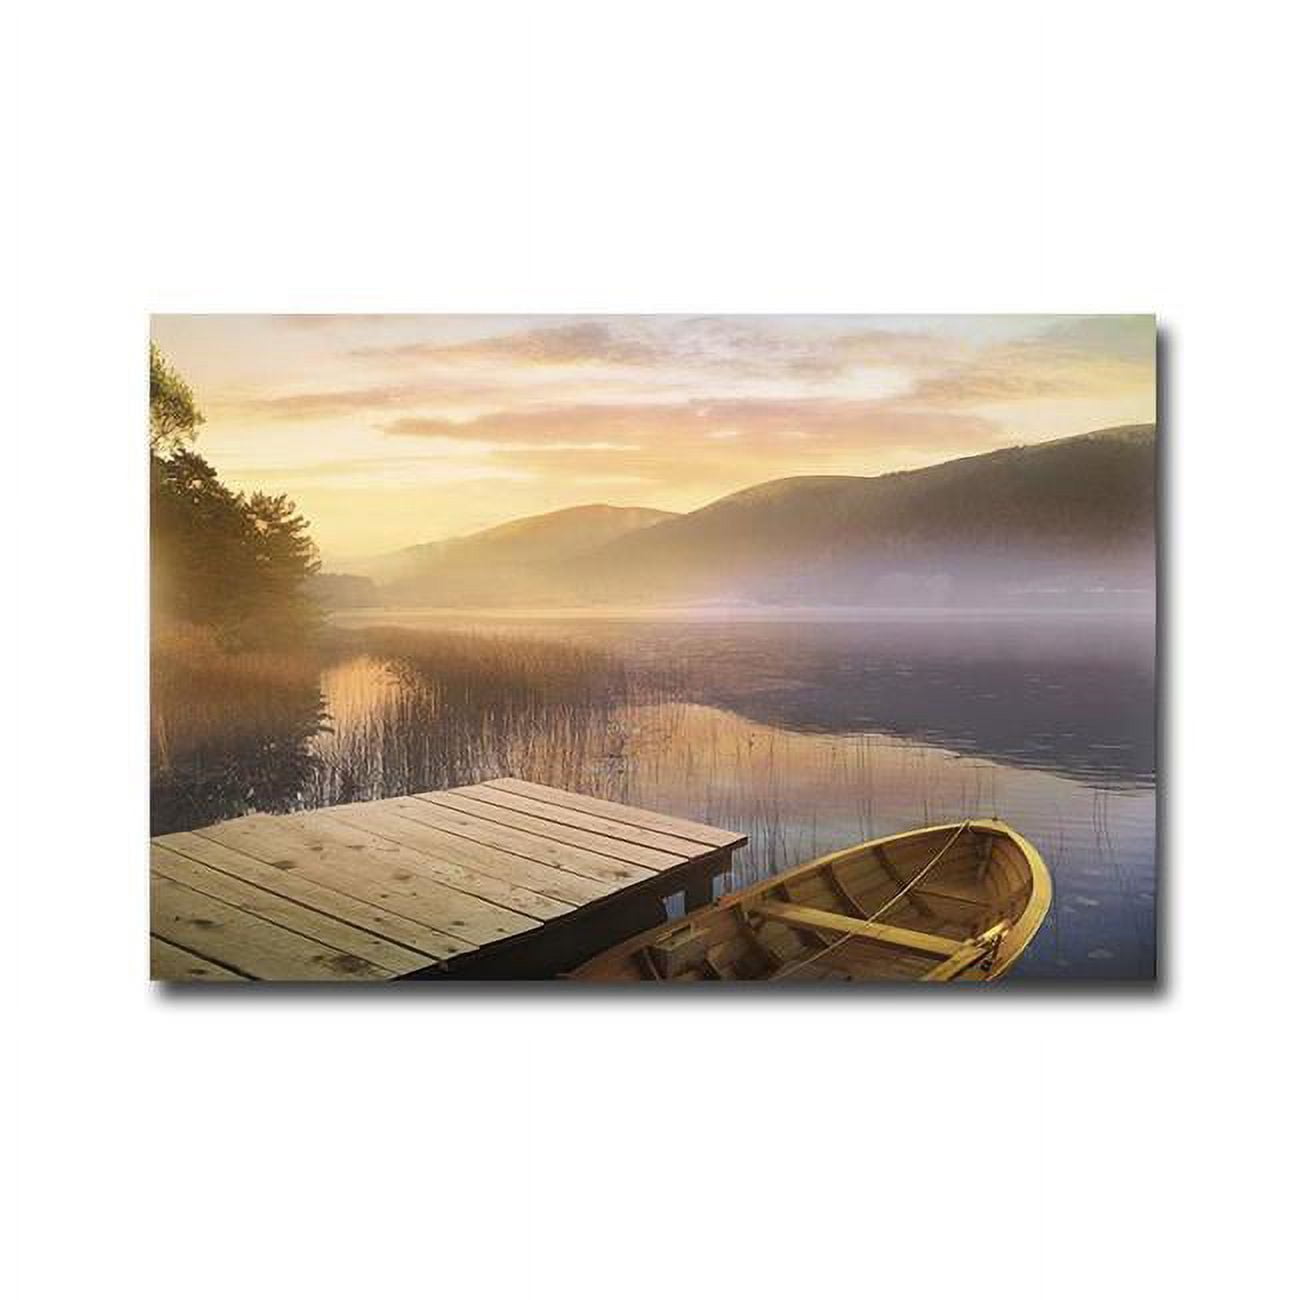 1624o454eg Morning On The Lake By Yaming Hu Premium Gallery-wrapped Canvas Giclee Art - 16 X 24 X 1.5 In.